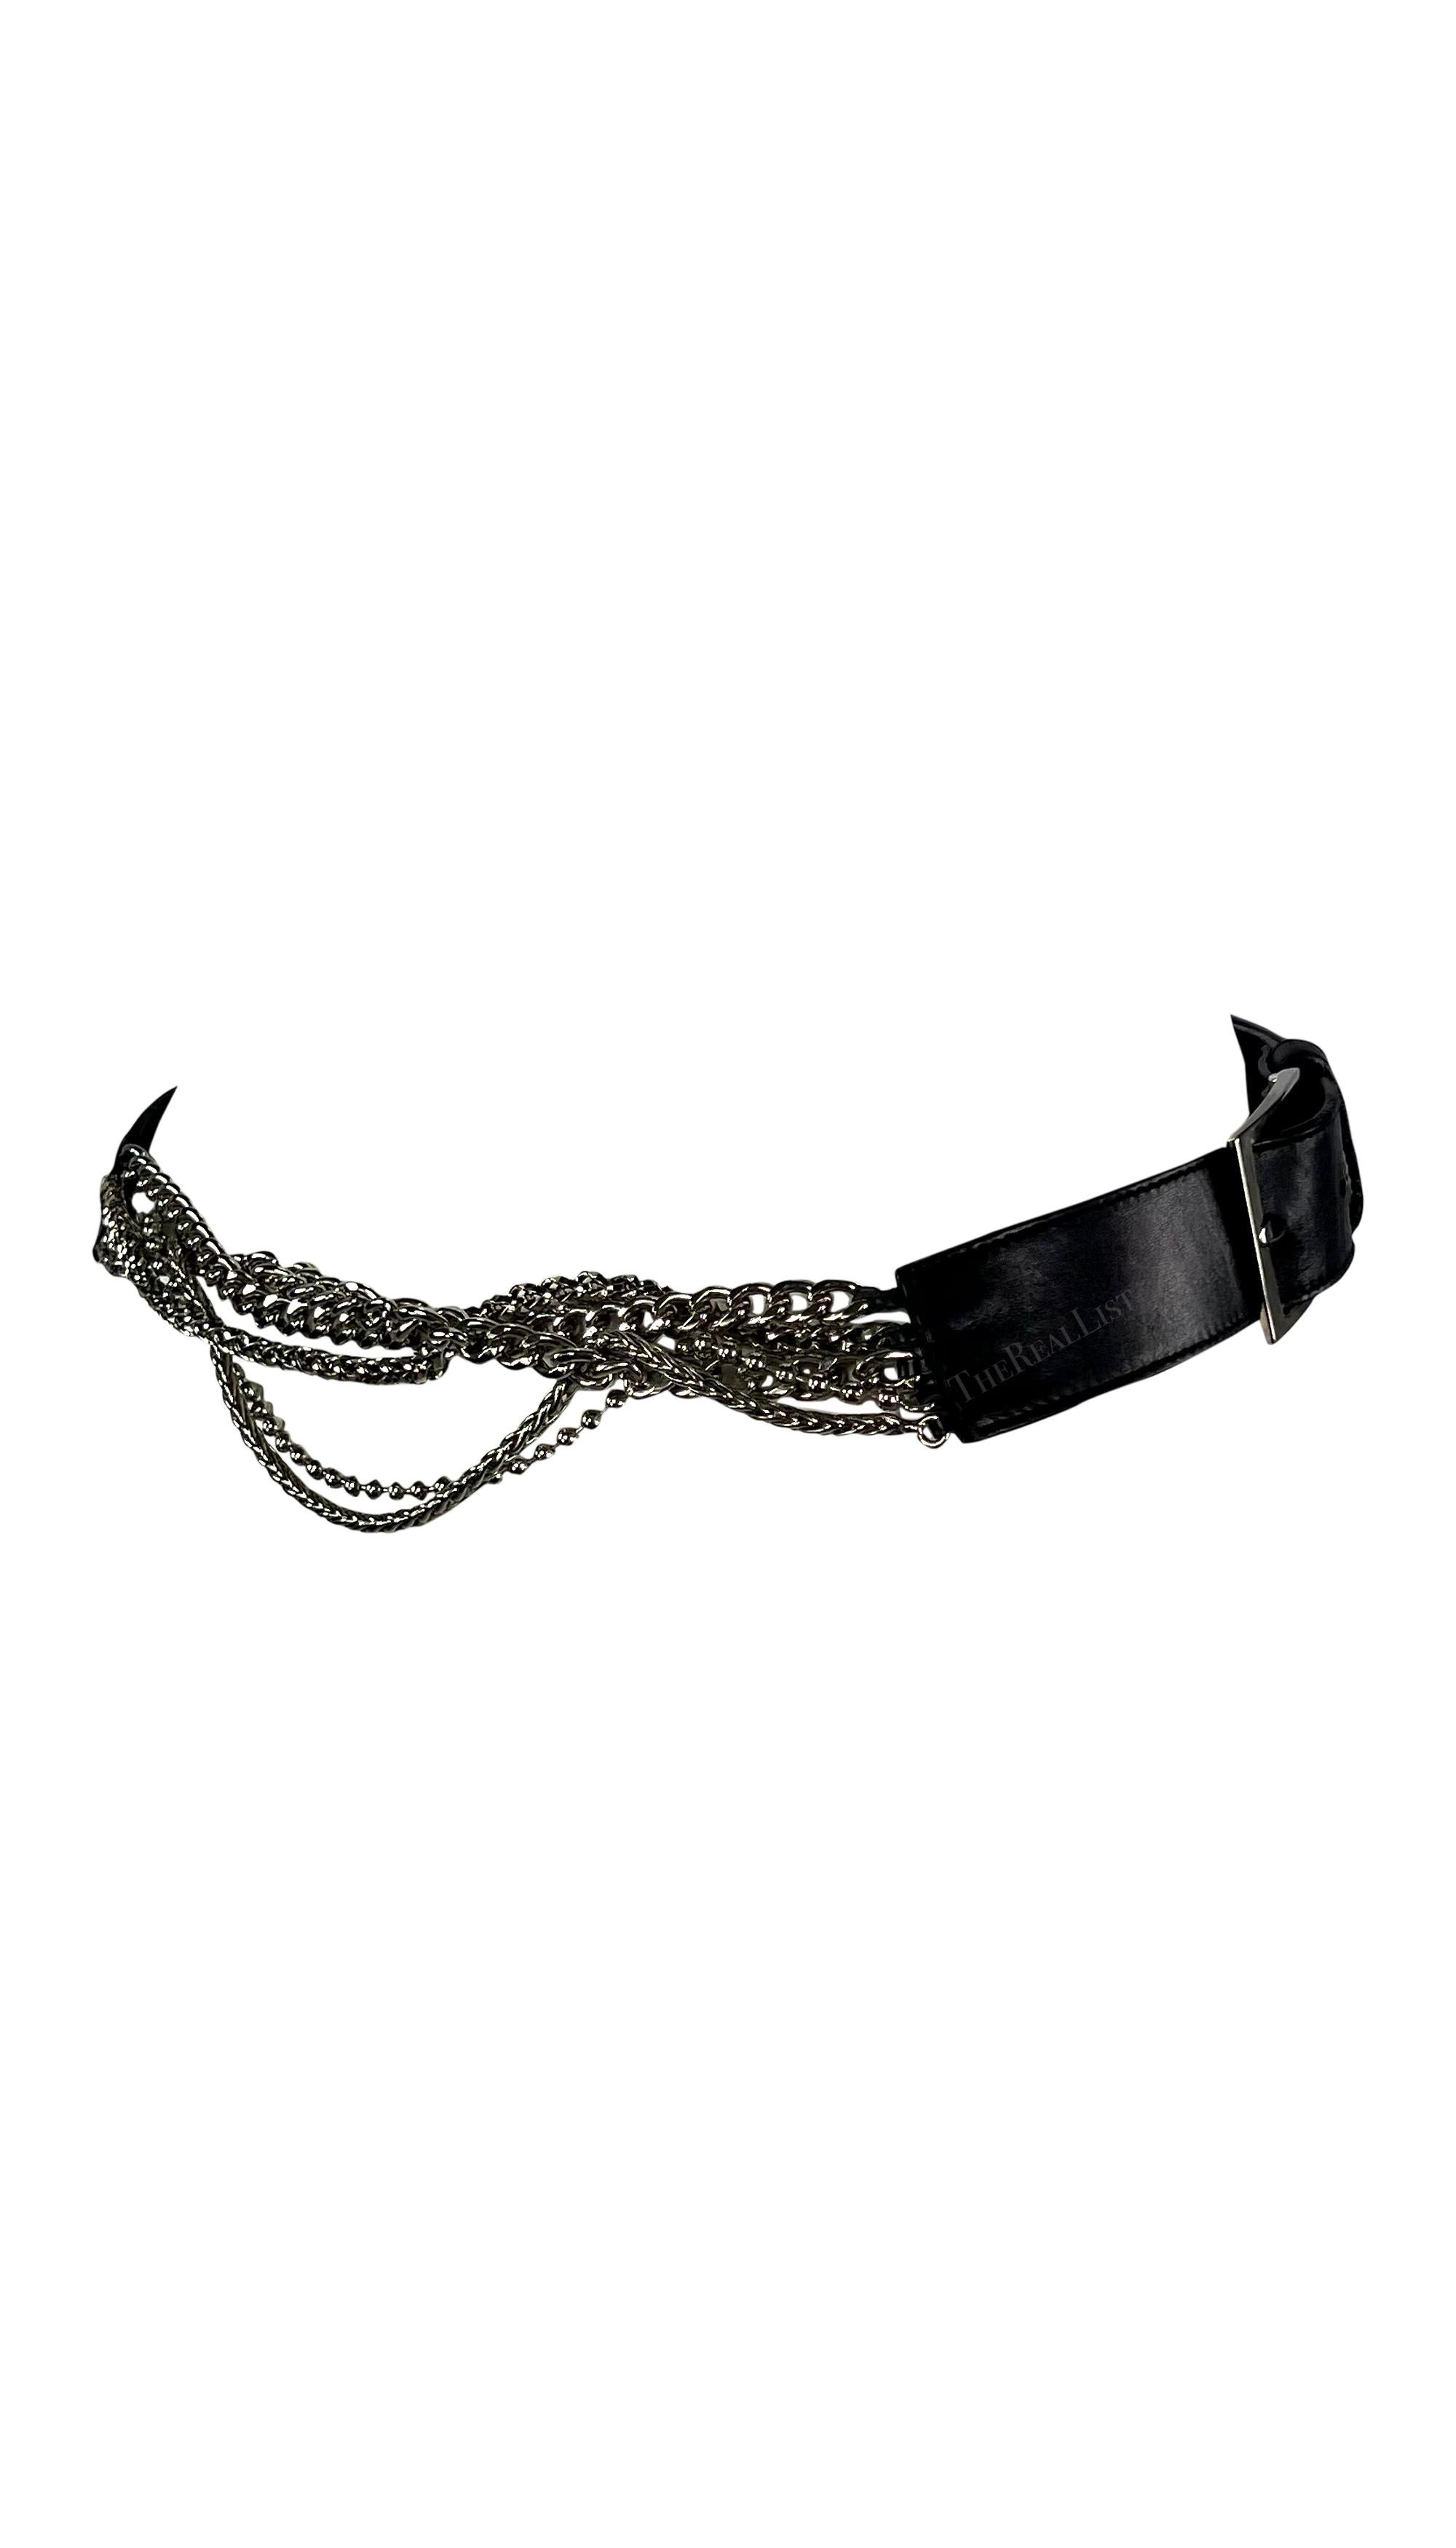 This fabulous black leather chain Versace belt, was designed by Donatella Versace. From the early 2000s, this belt is constructed of leather and chrome metal chains. The belt features two square buckles and is made complete with chrome chains that